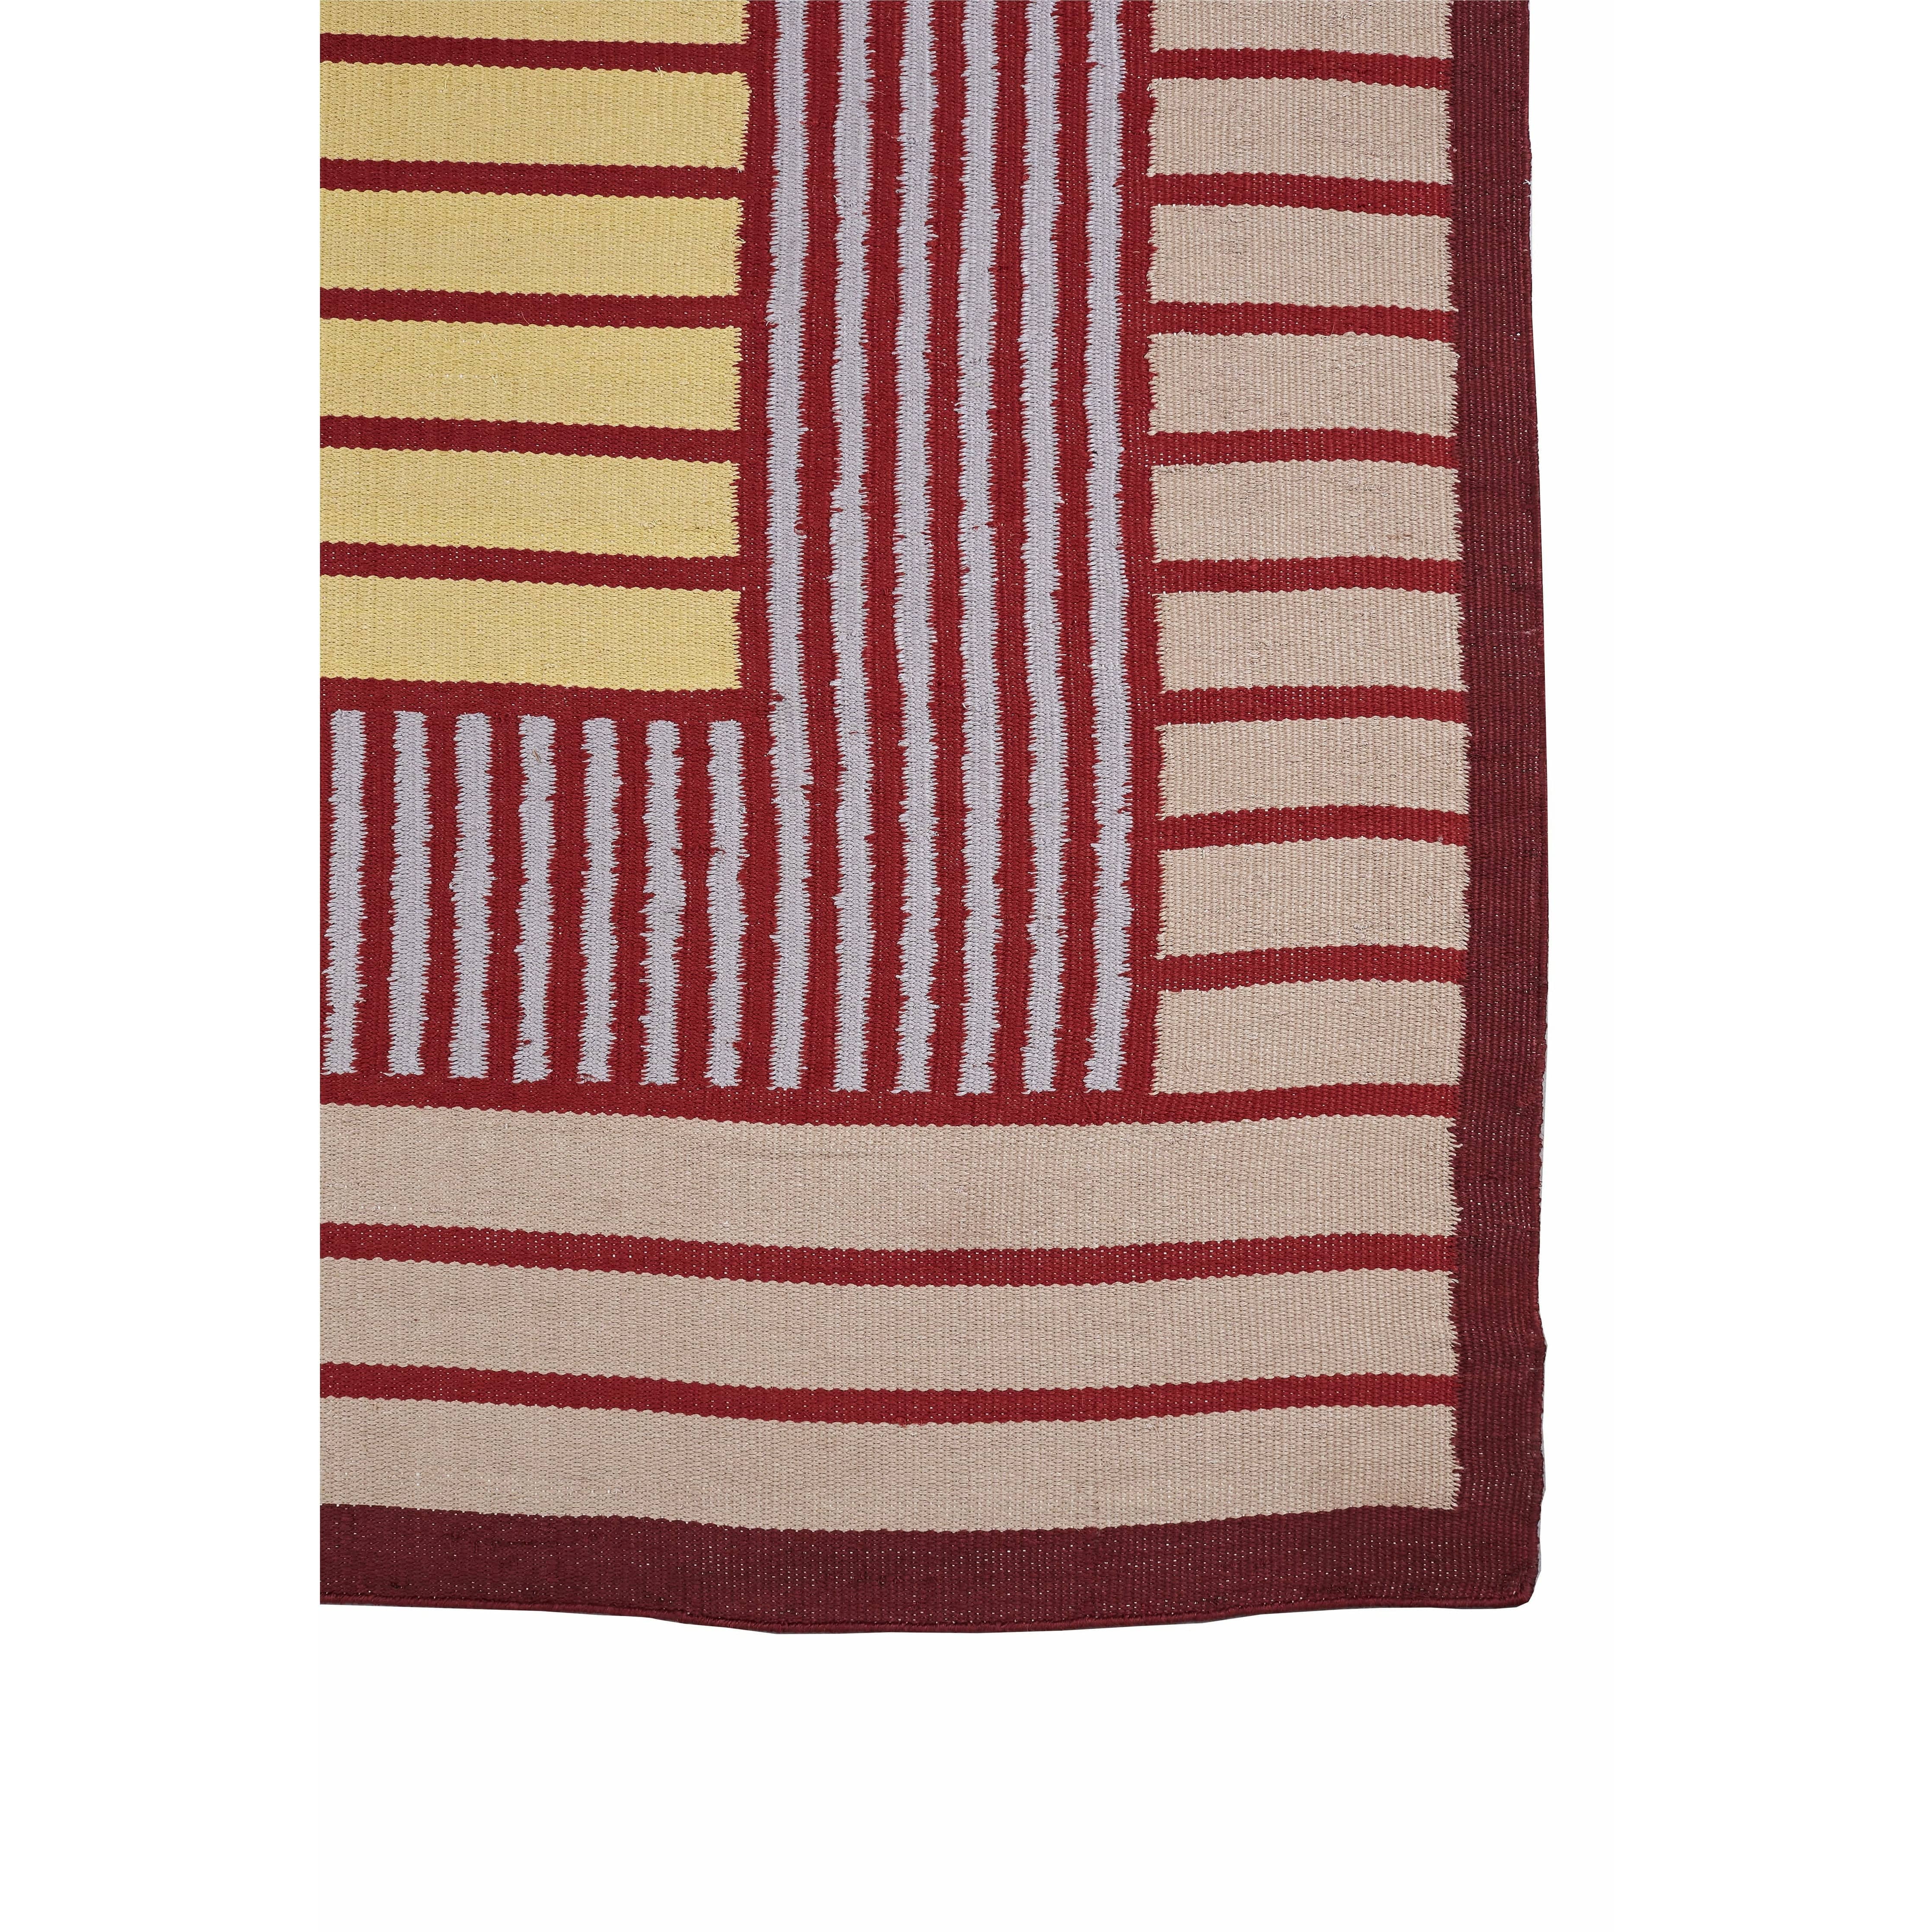 Massimo Hemp Collection By Tanja Kirst Rug 200x300, Red